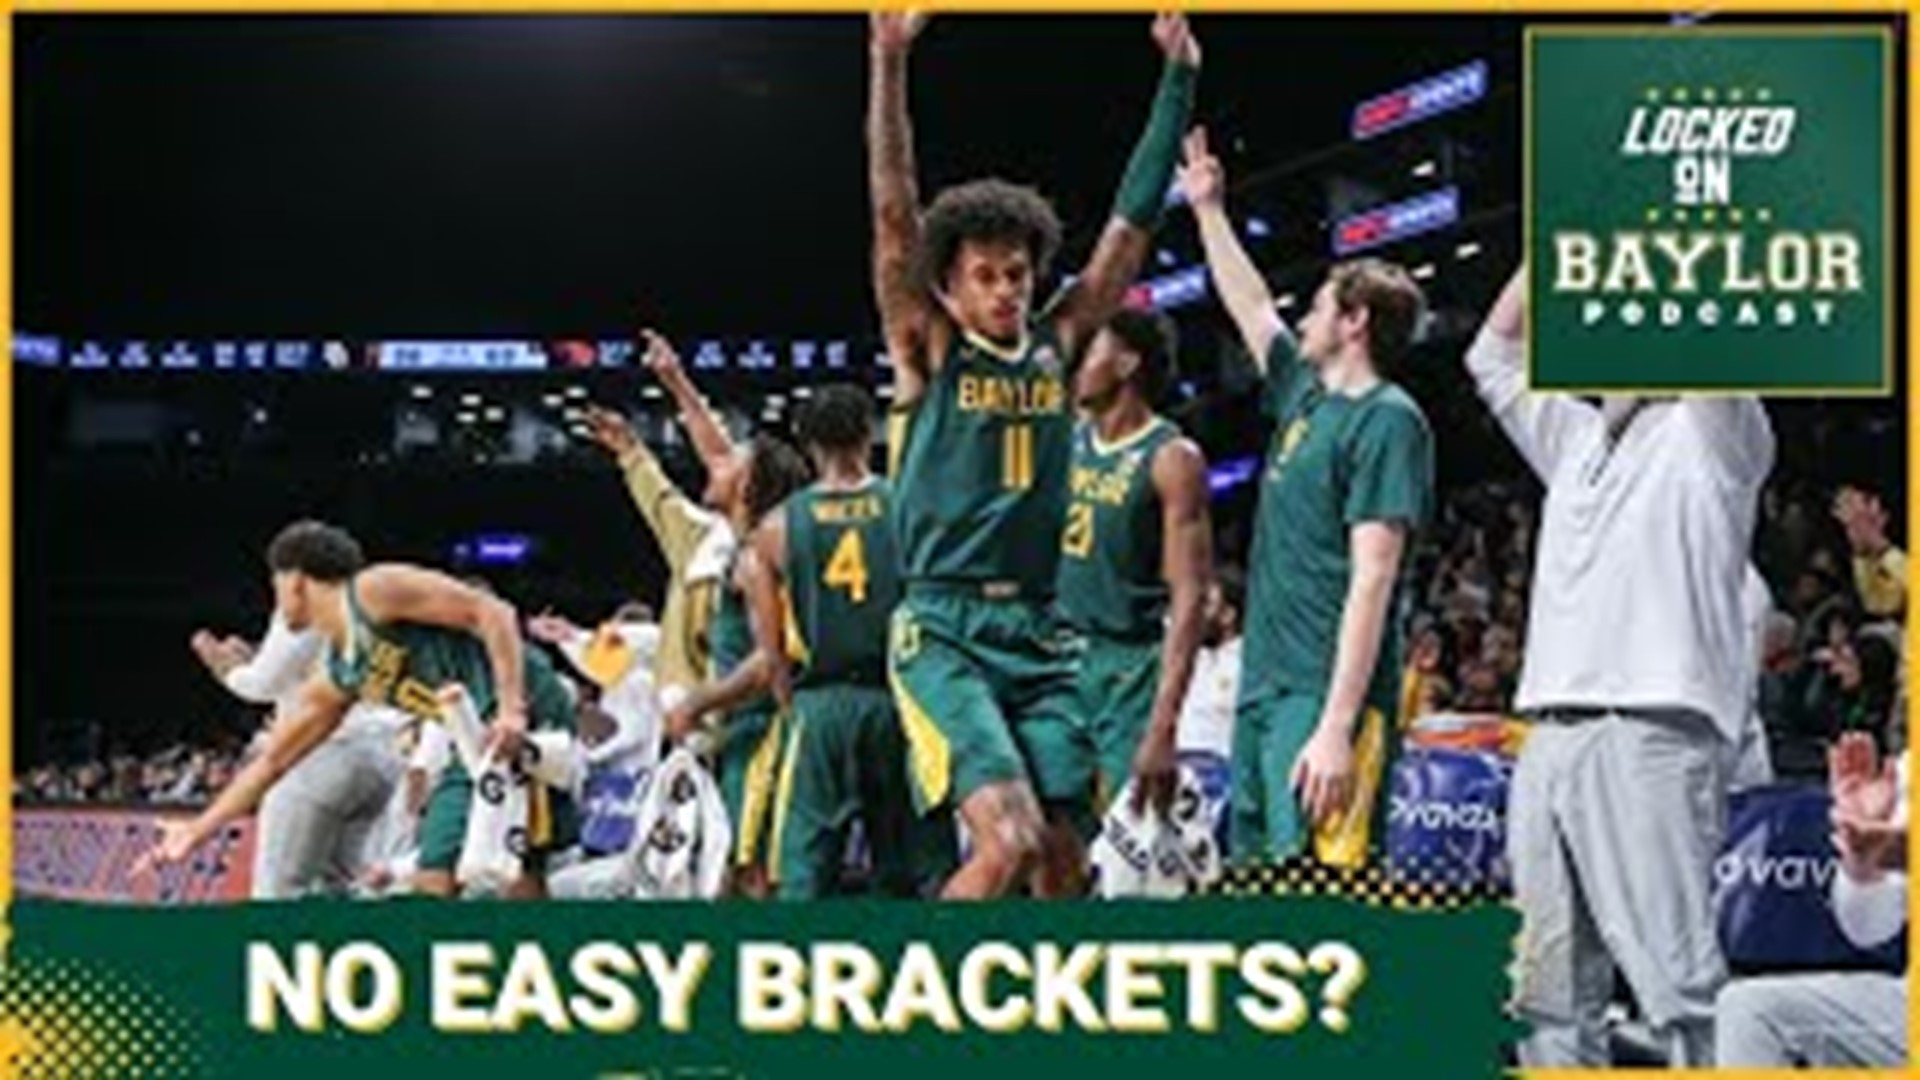 Baylor might have actually gotten a bit lucky with their NCAA Tournament draw, avoiding the two unequivocal best teams in the dance with Houston and UCONN.